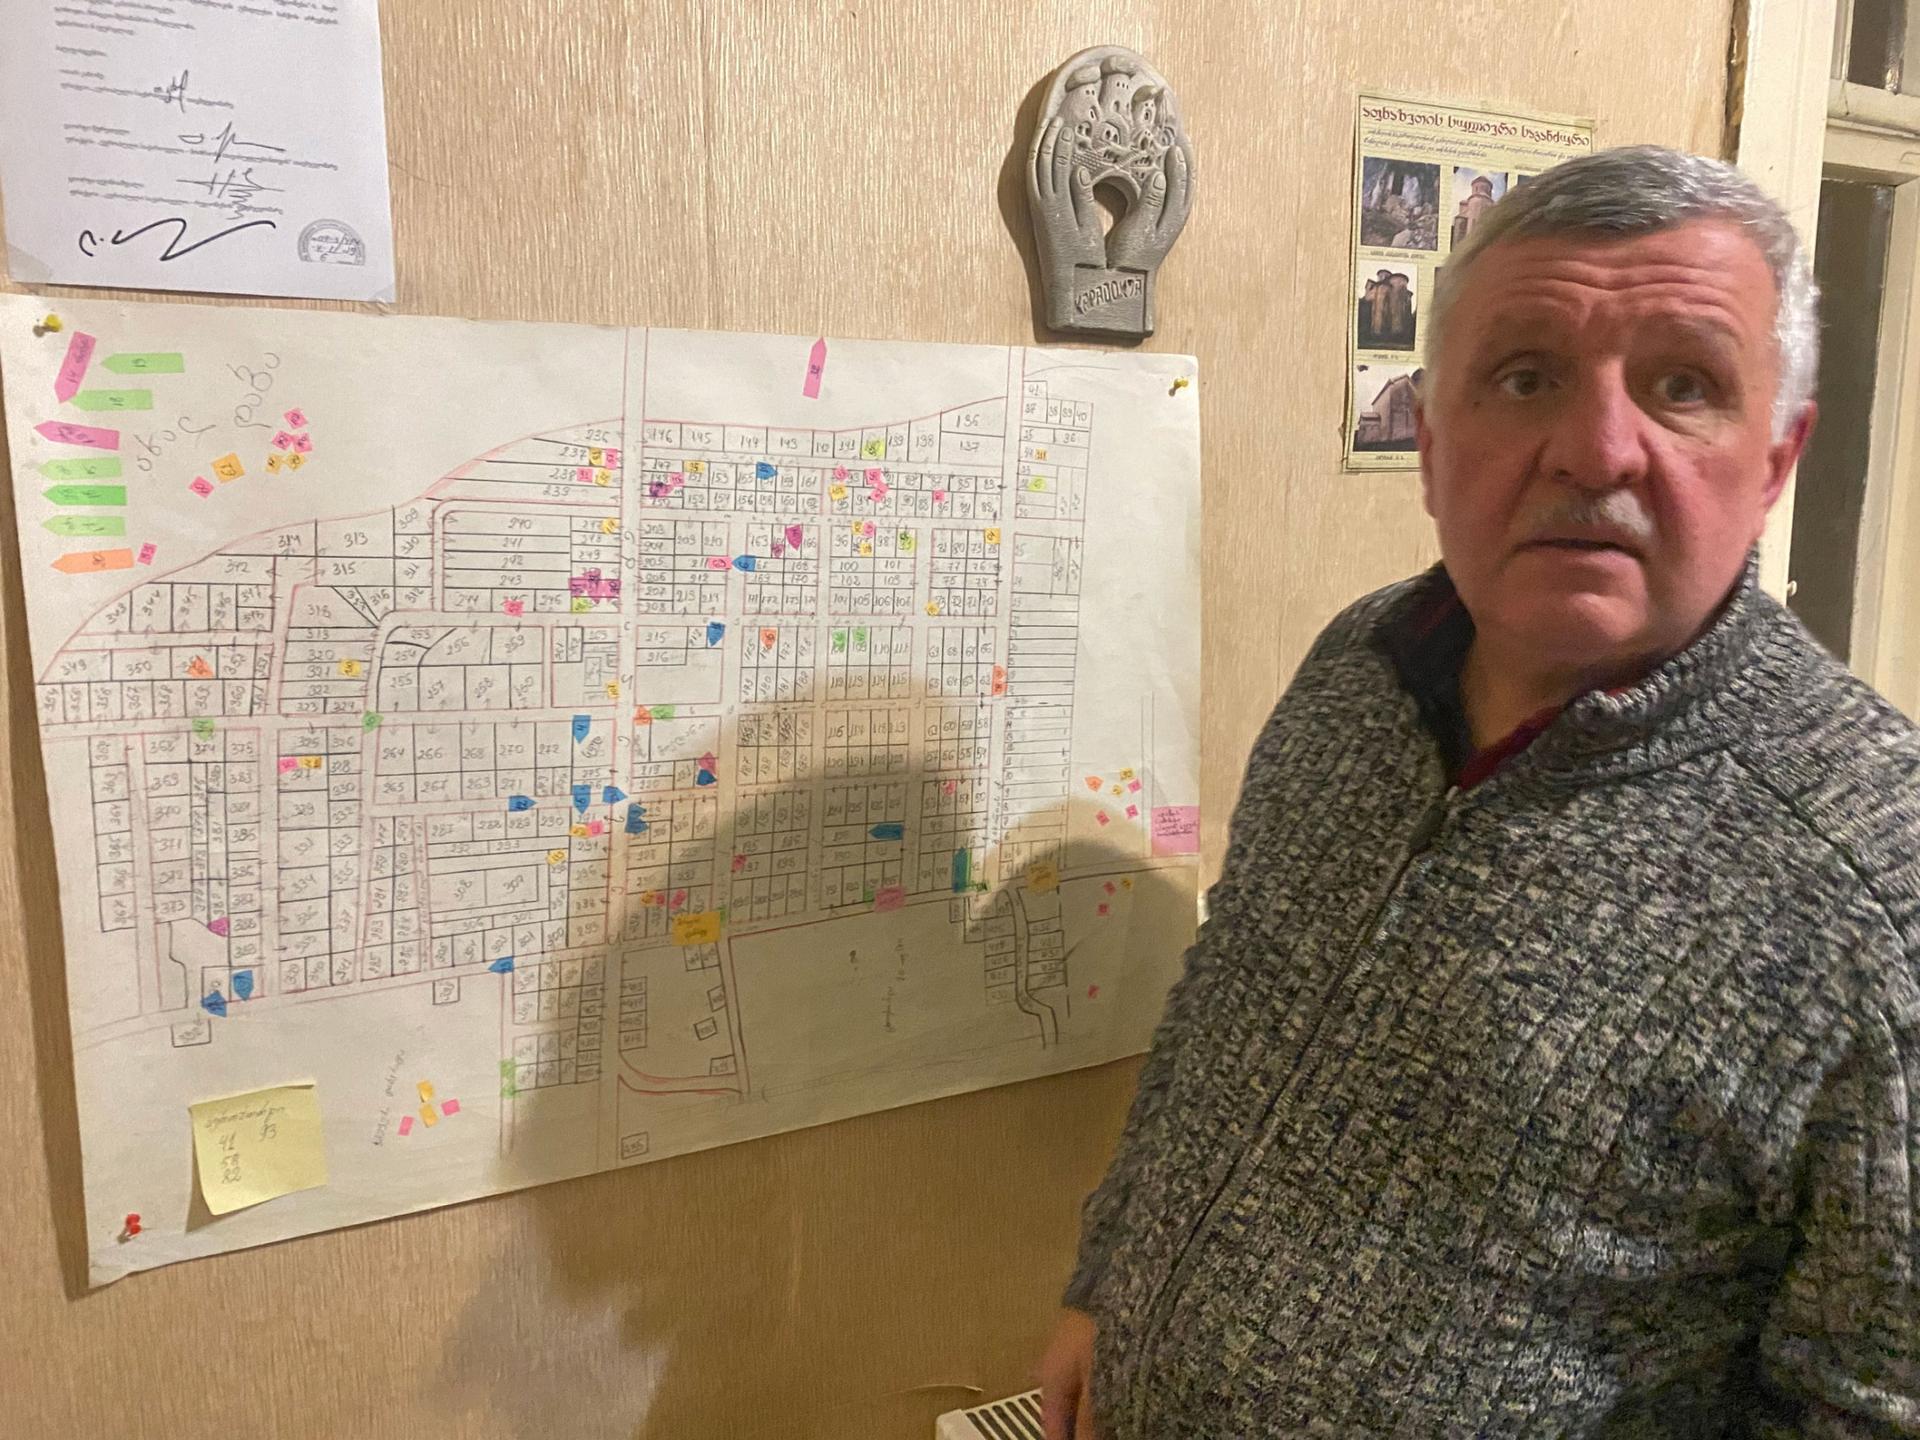 Malhaz Pataraia, a lawyer who was displaced by war in Abkhazia, Georgia, back in 1993, stands by a map of a village in Abkhazia where more than 100 Georgians were killed during the war. 